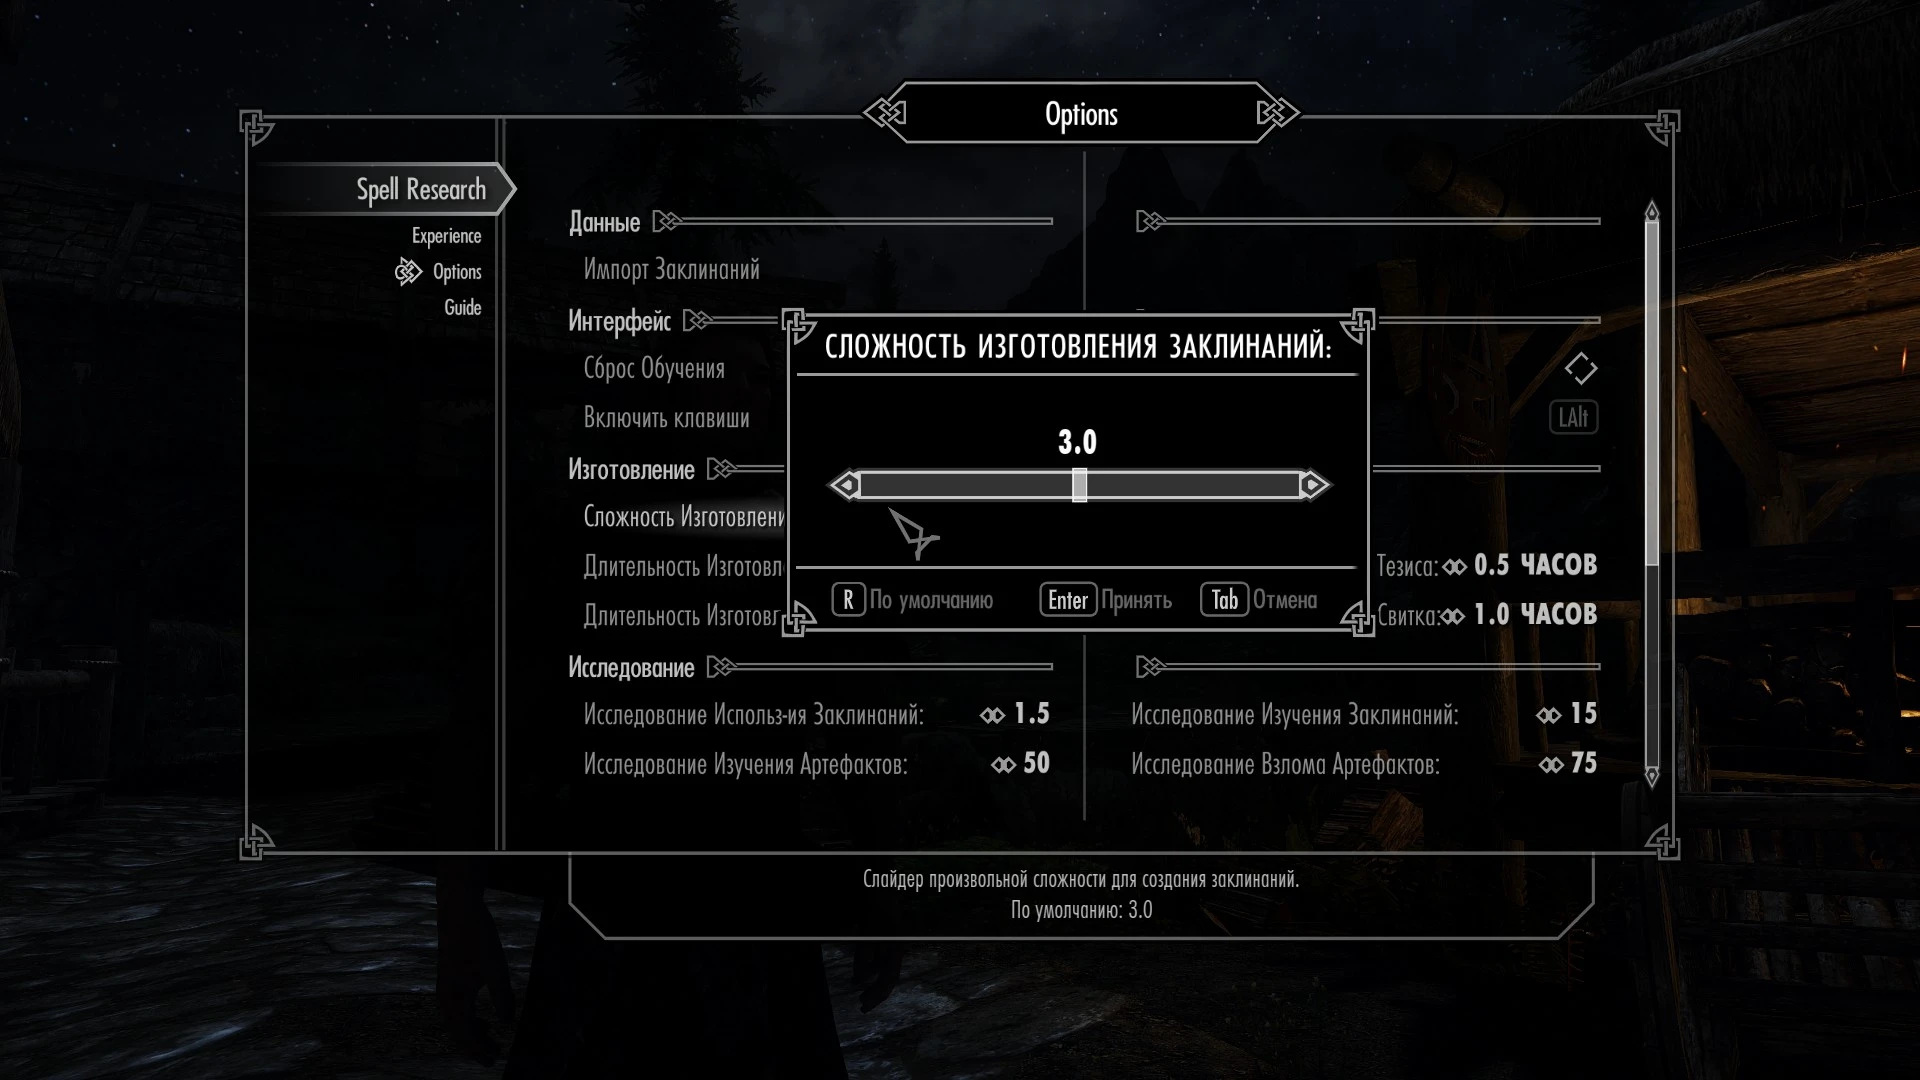 how to change skyrim language from russian to english